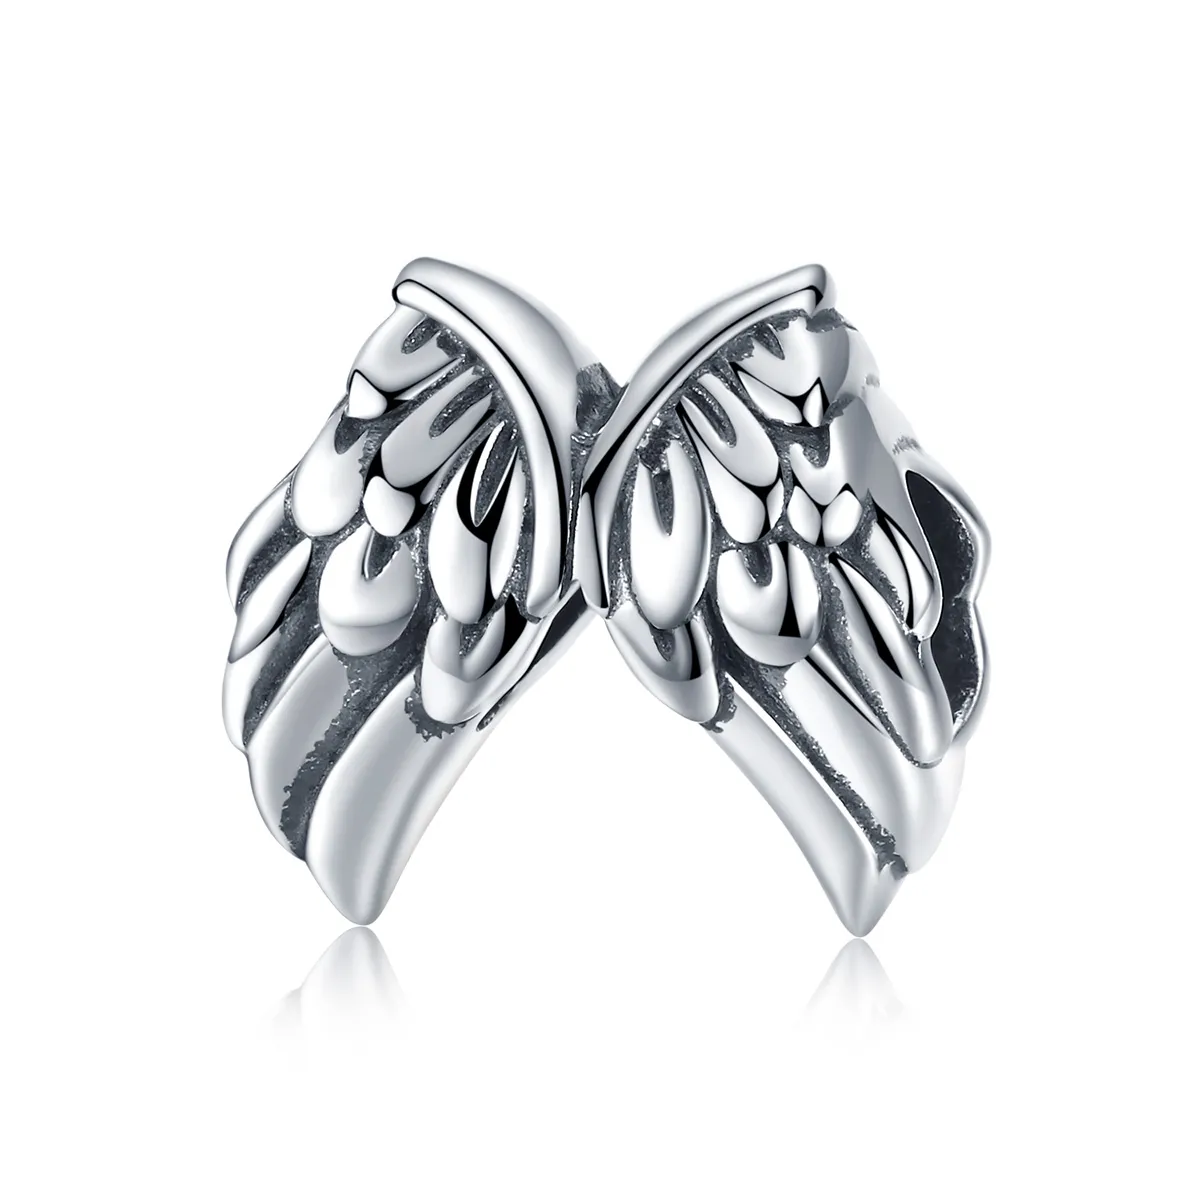 Pandora Style Silver Guardian Wings Charm - SCC1091